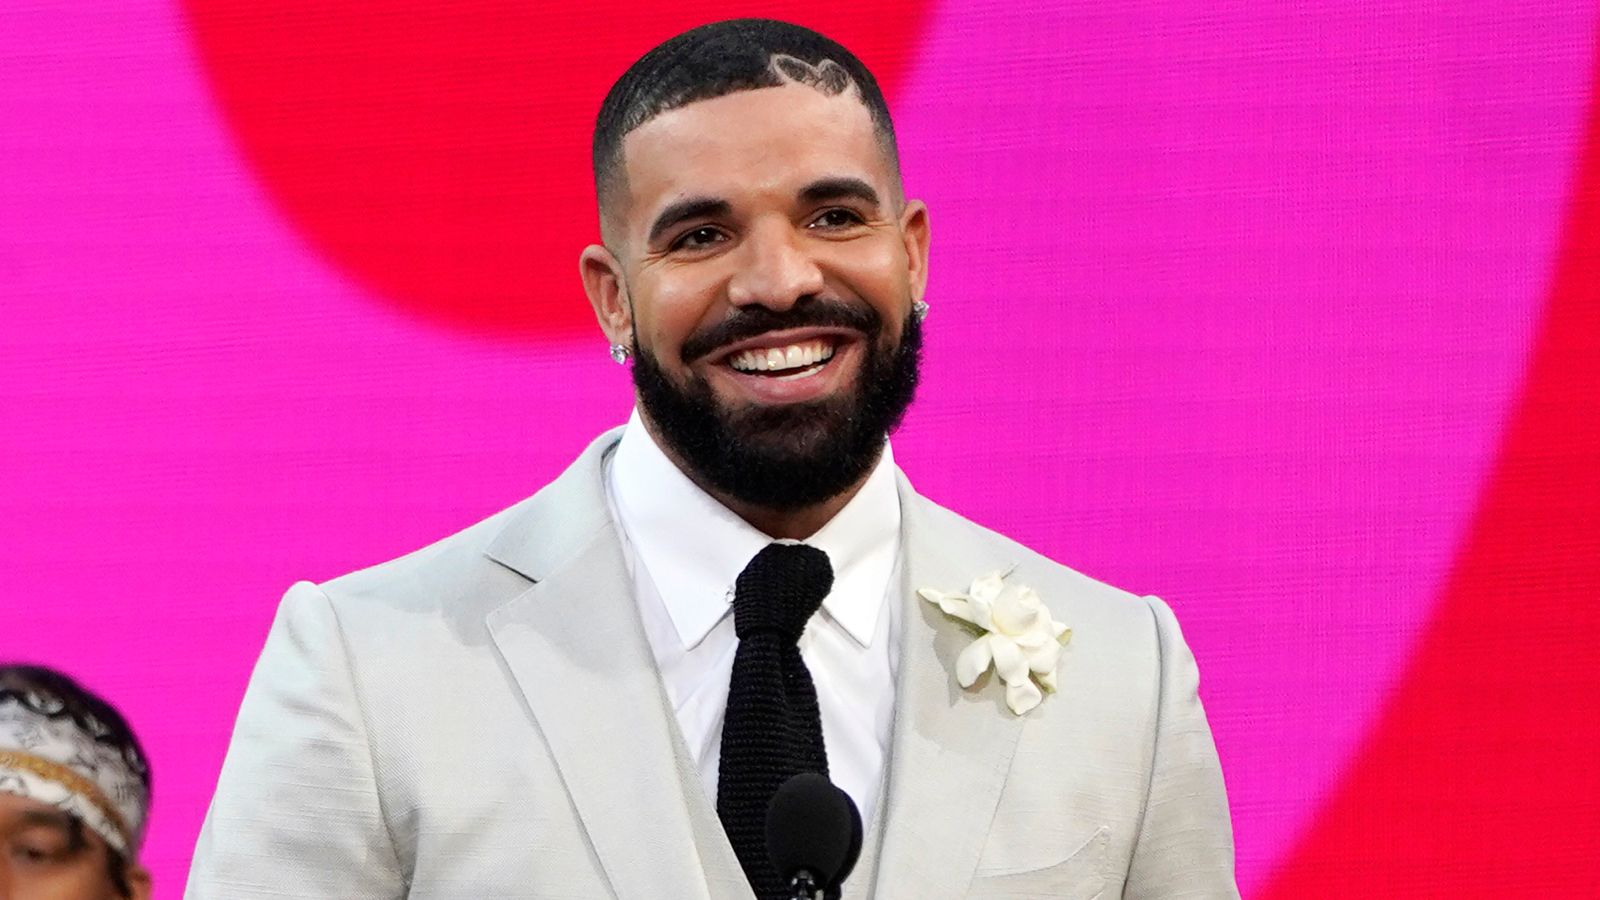 Drake Rapper and singer withdraws nominations for 2022 Grammy Awards